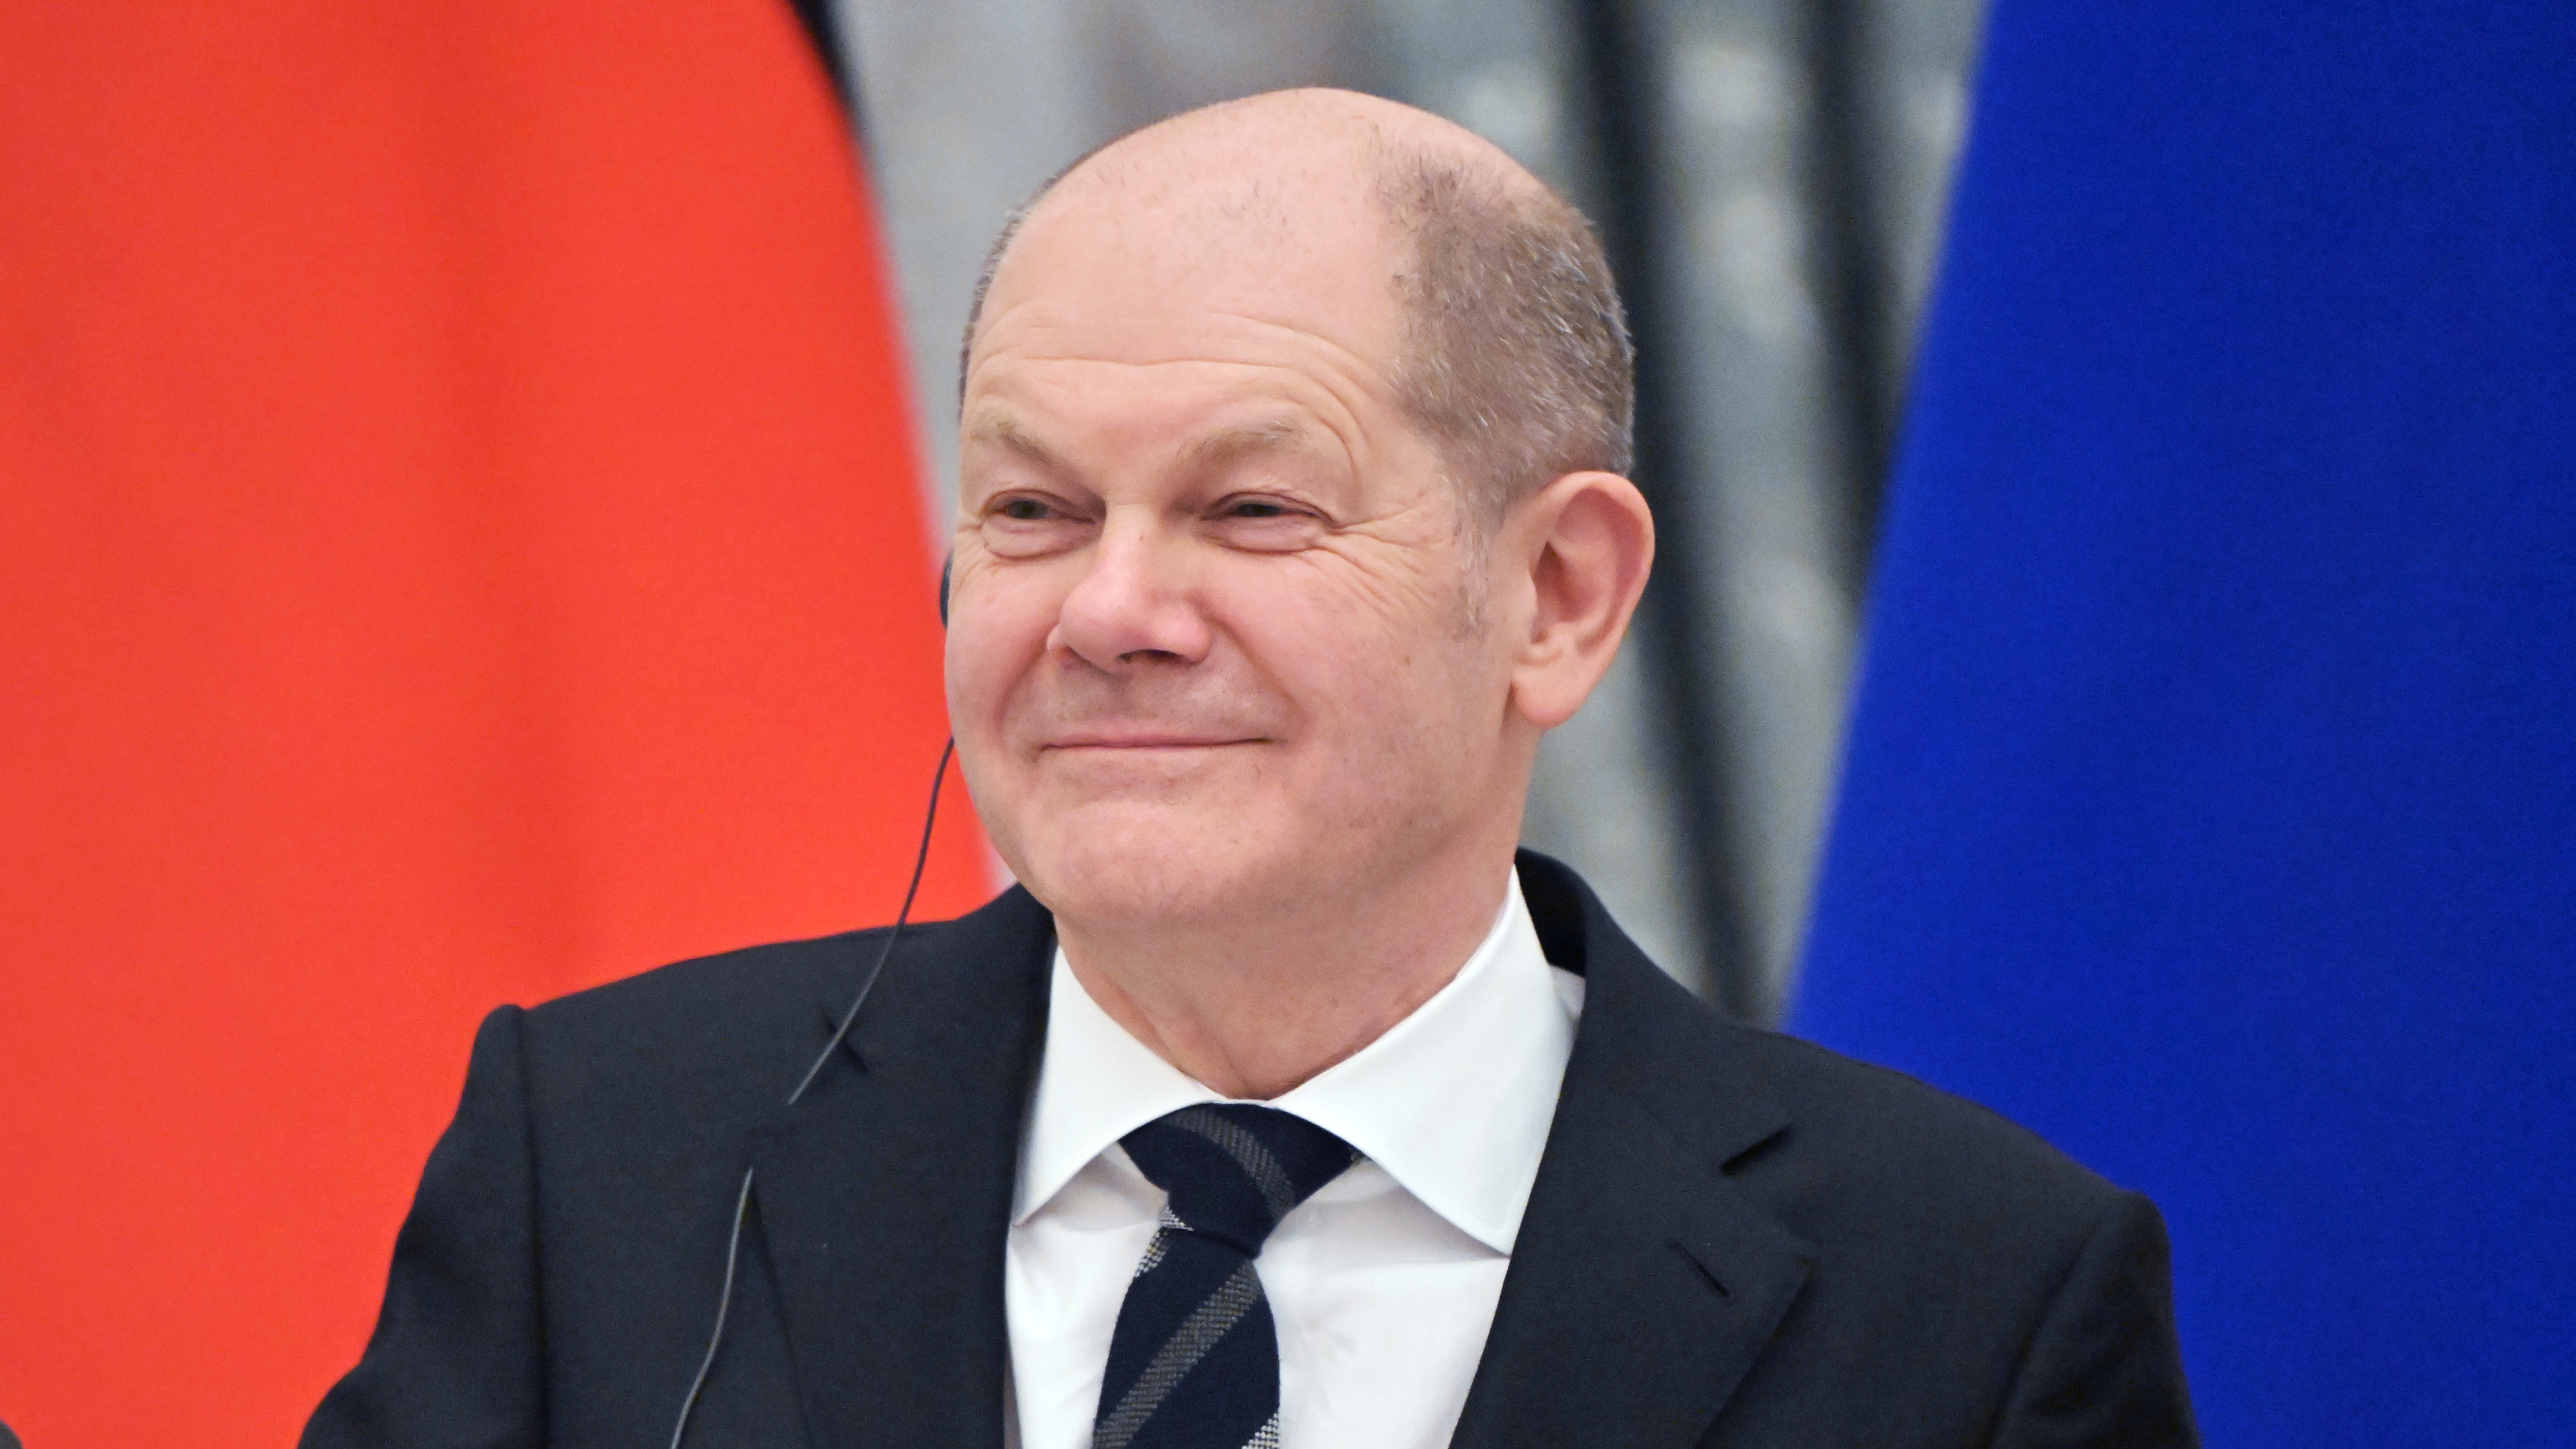 Olaf Scholz during a joint press conference with Vladimir Putin in Moscow